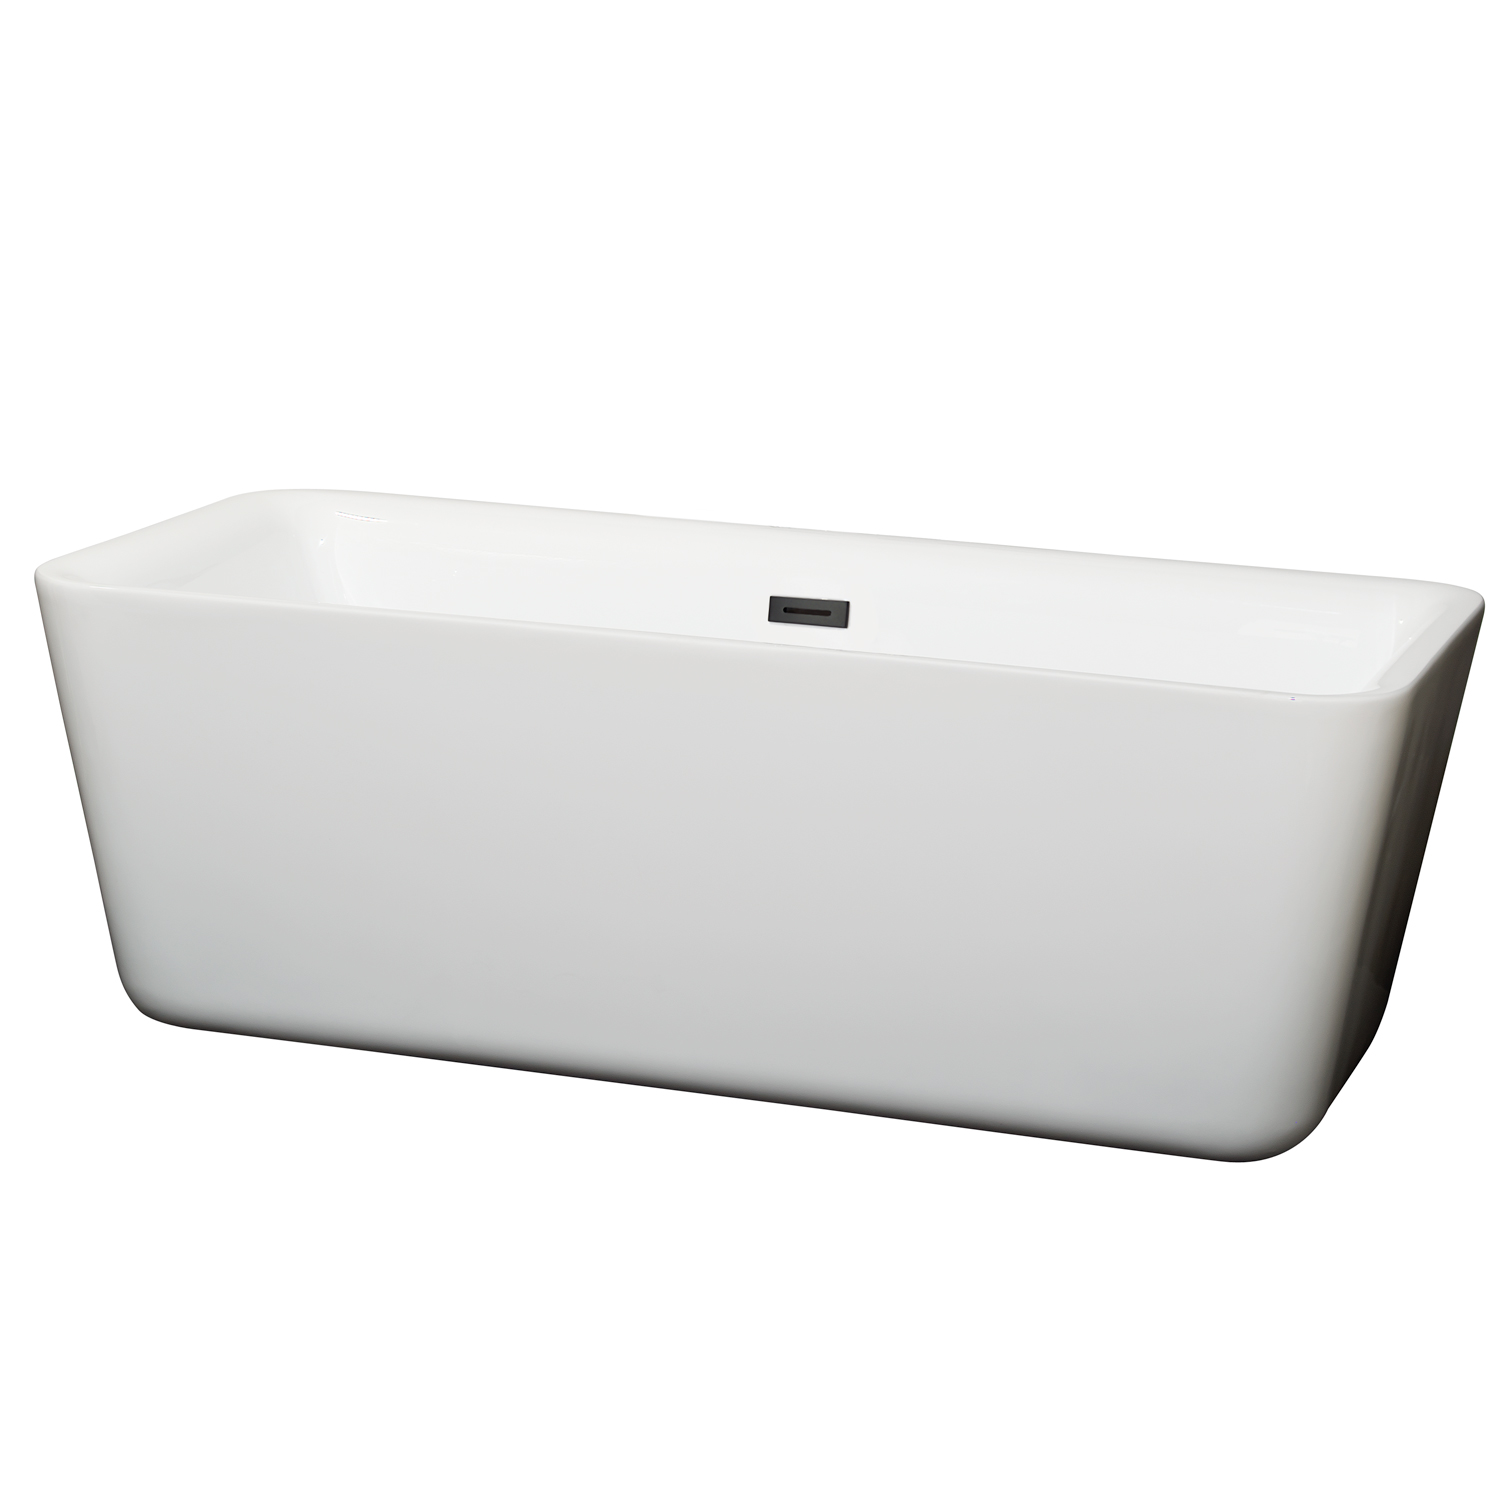 69" Freestanding Bathtub in White with Matte Black Drain and Overflow Trim